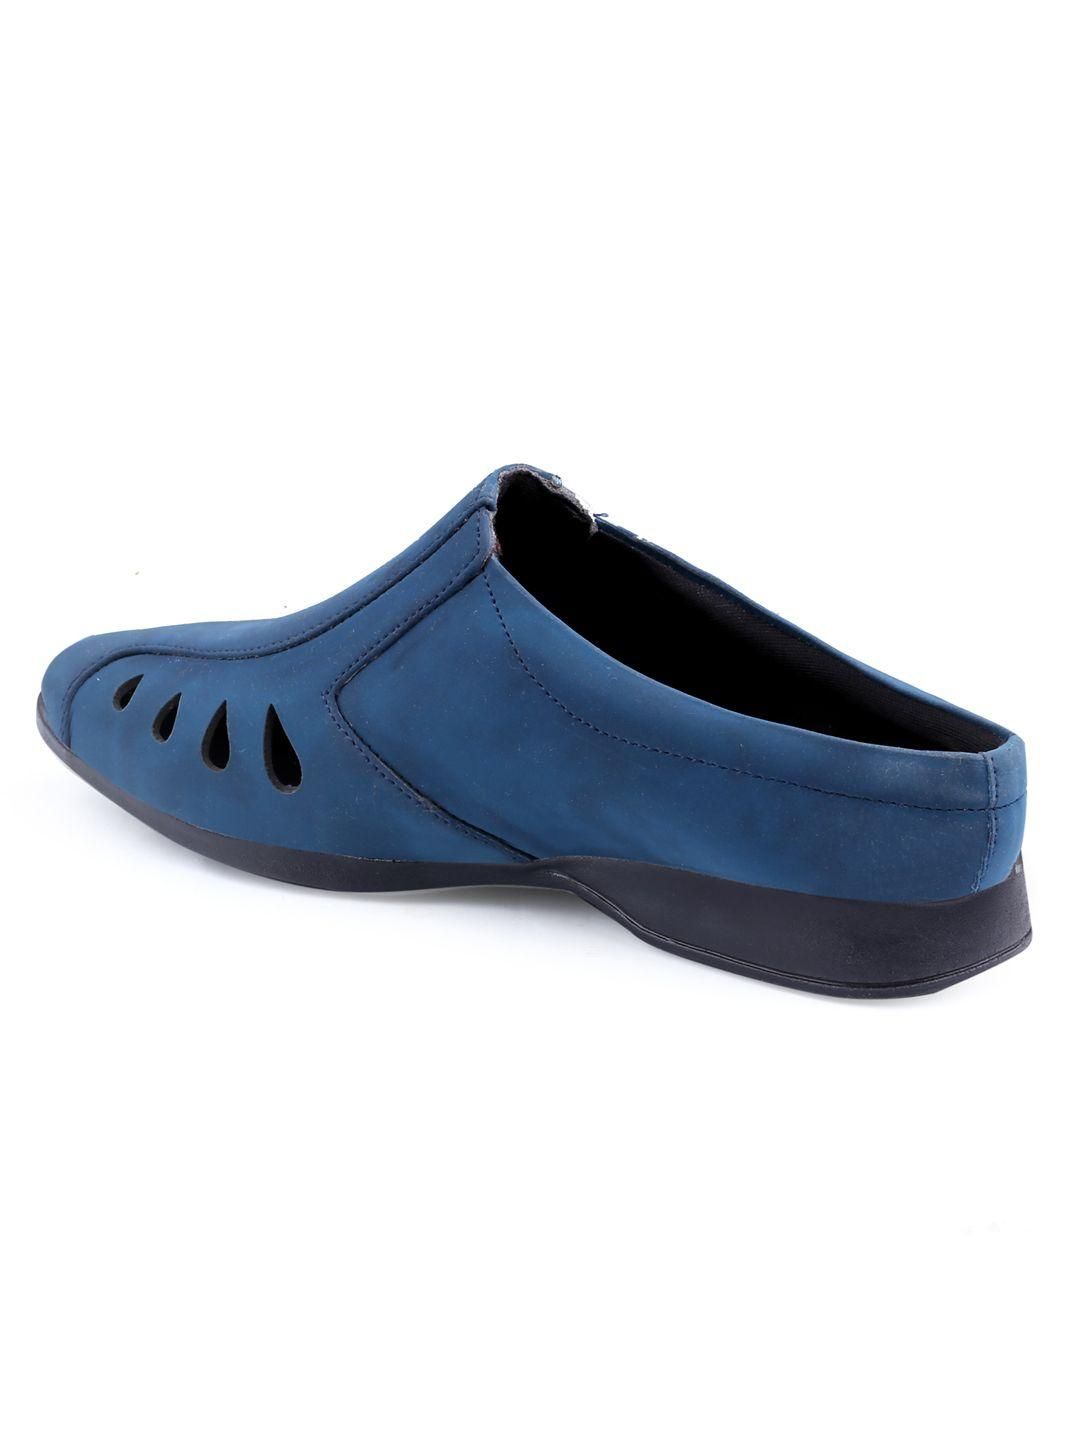 Stylish Mens Casual Loafer